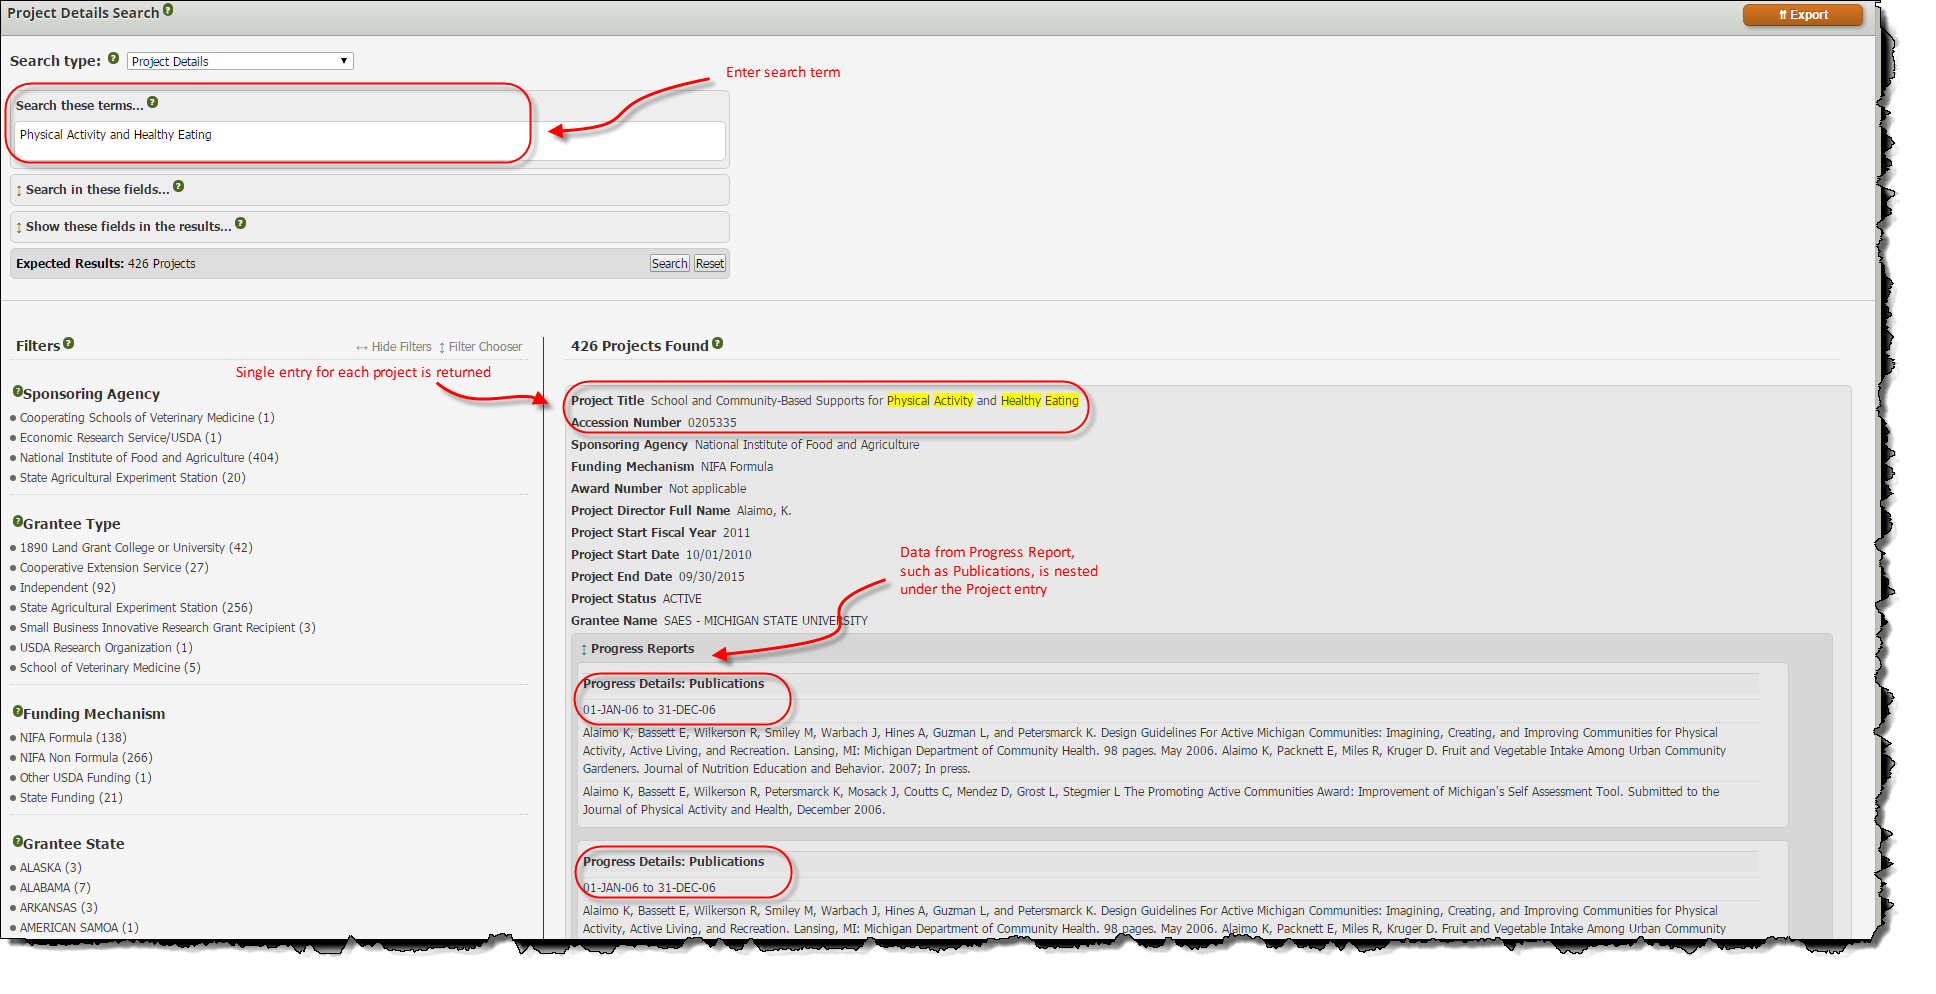 Project Details Search with 'search these terms' highlighted.